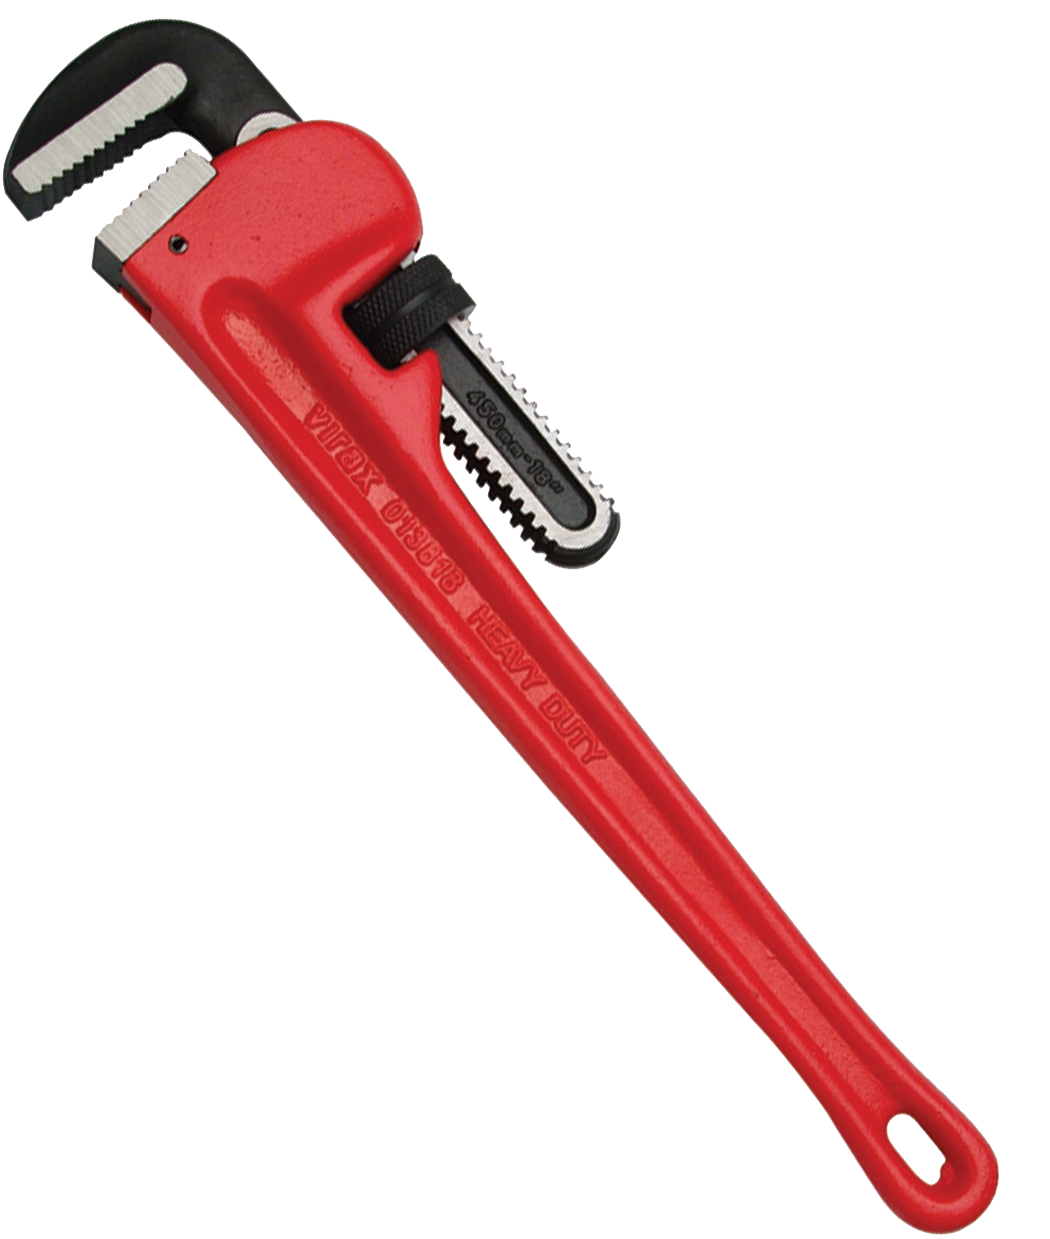 Pipe Wrench PNG Image